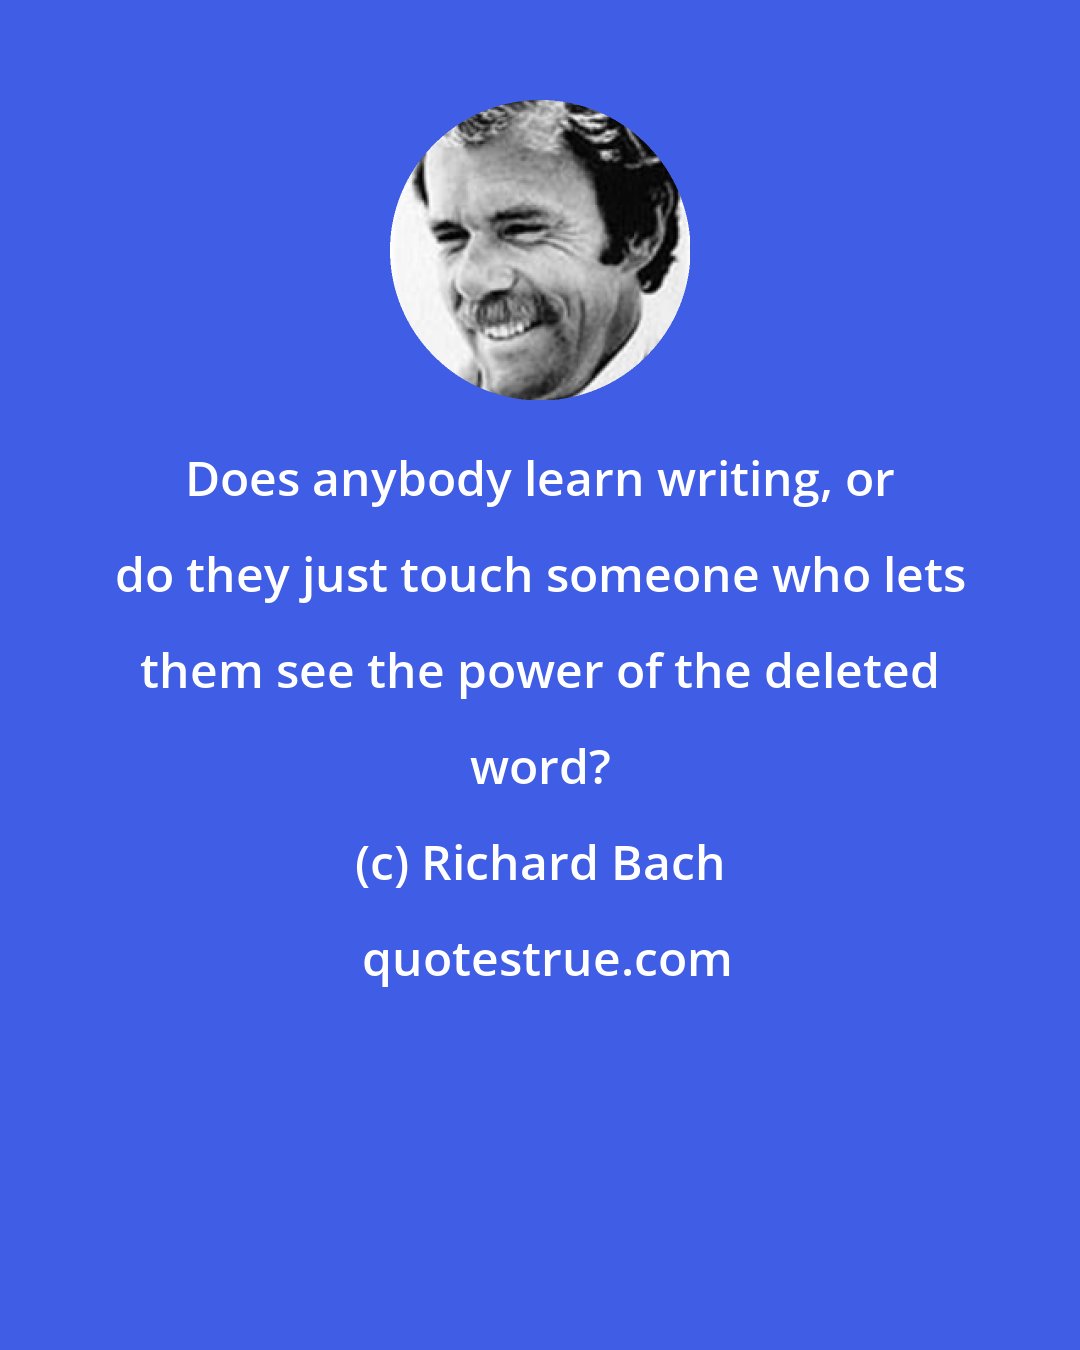 Richard Bach: Does anybody learn writing, or do they just touch someone who lets them see the power of the deleted word?